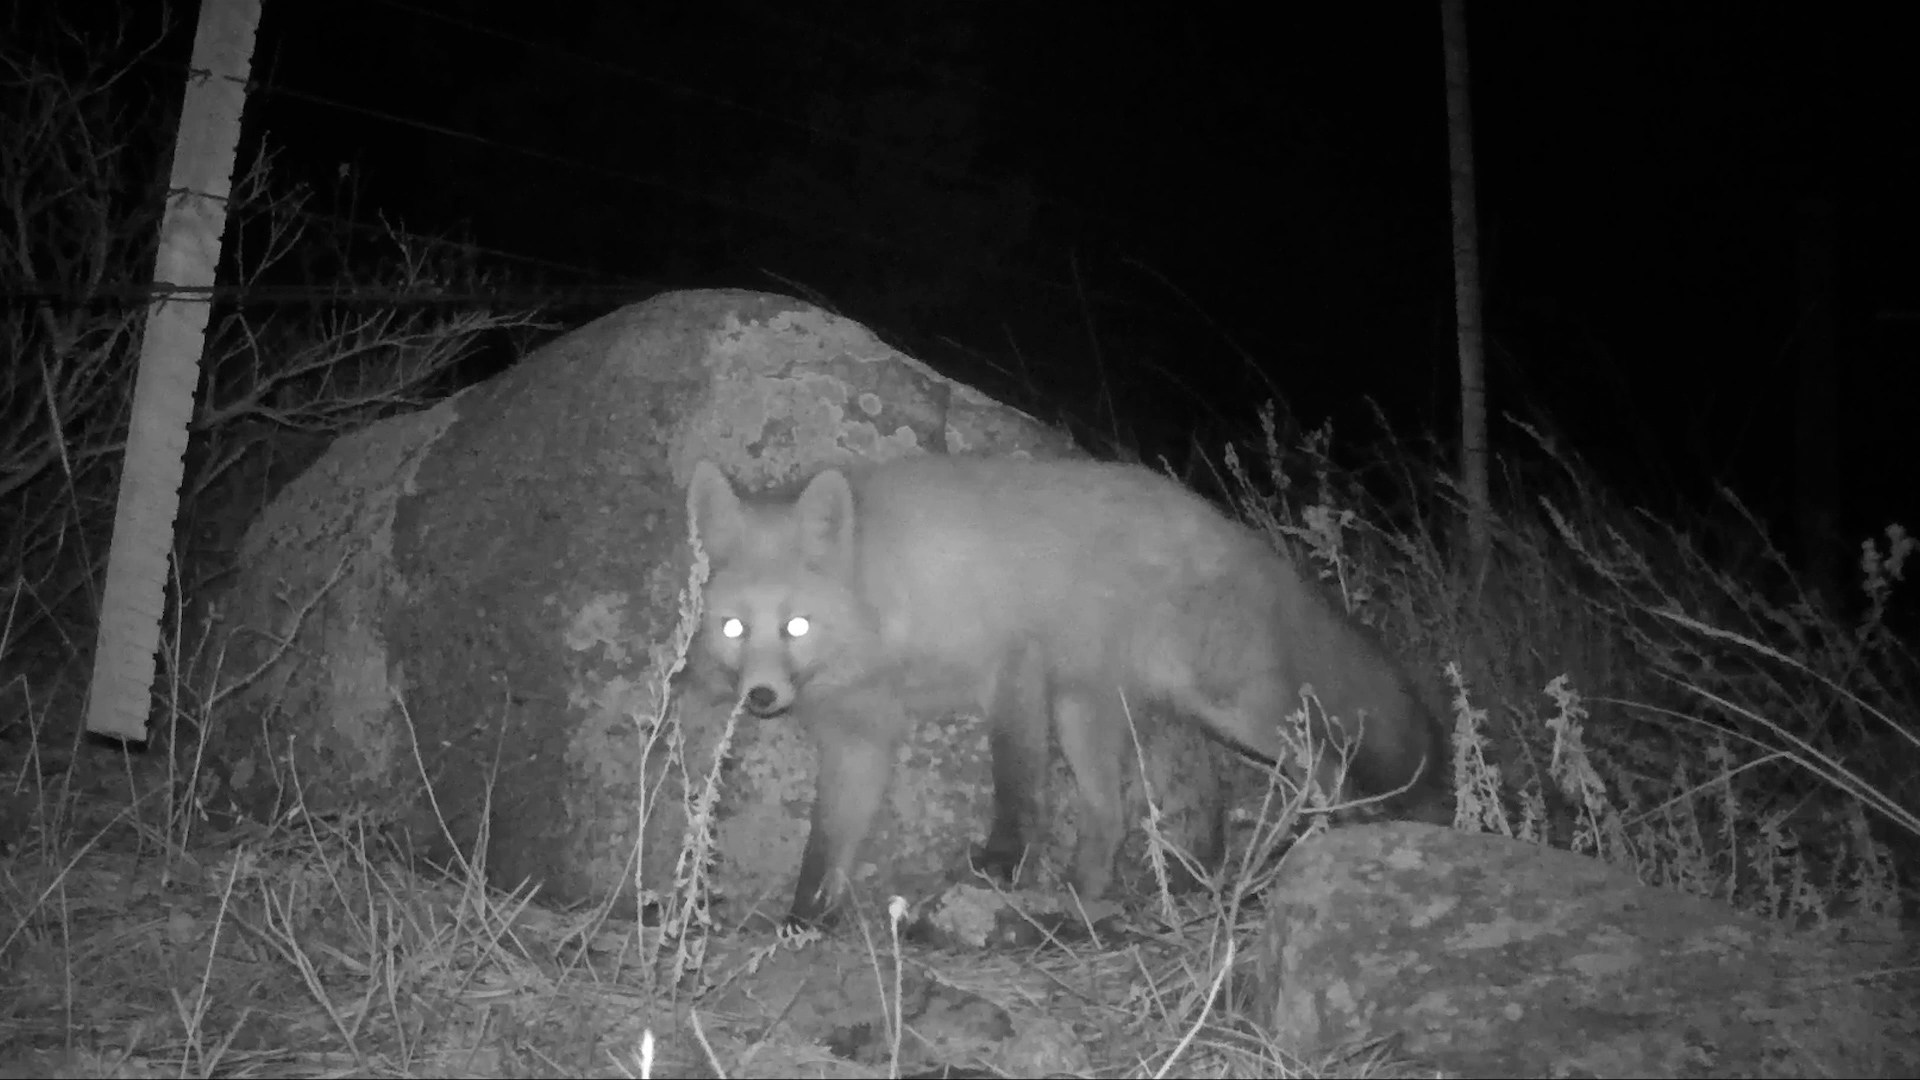 City Wildlife Cameras Track Bears, Deer and Other Animals | City of Boulder